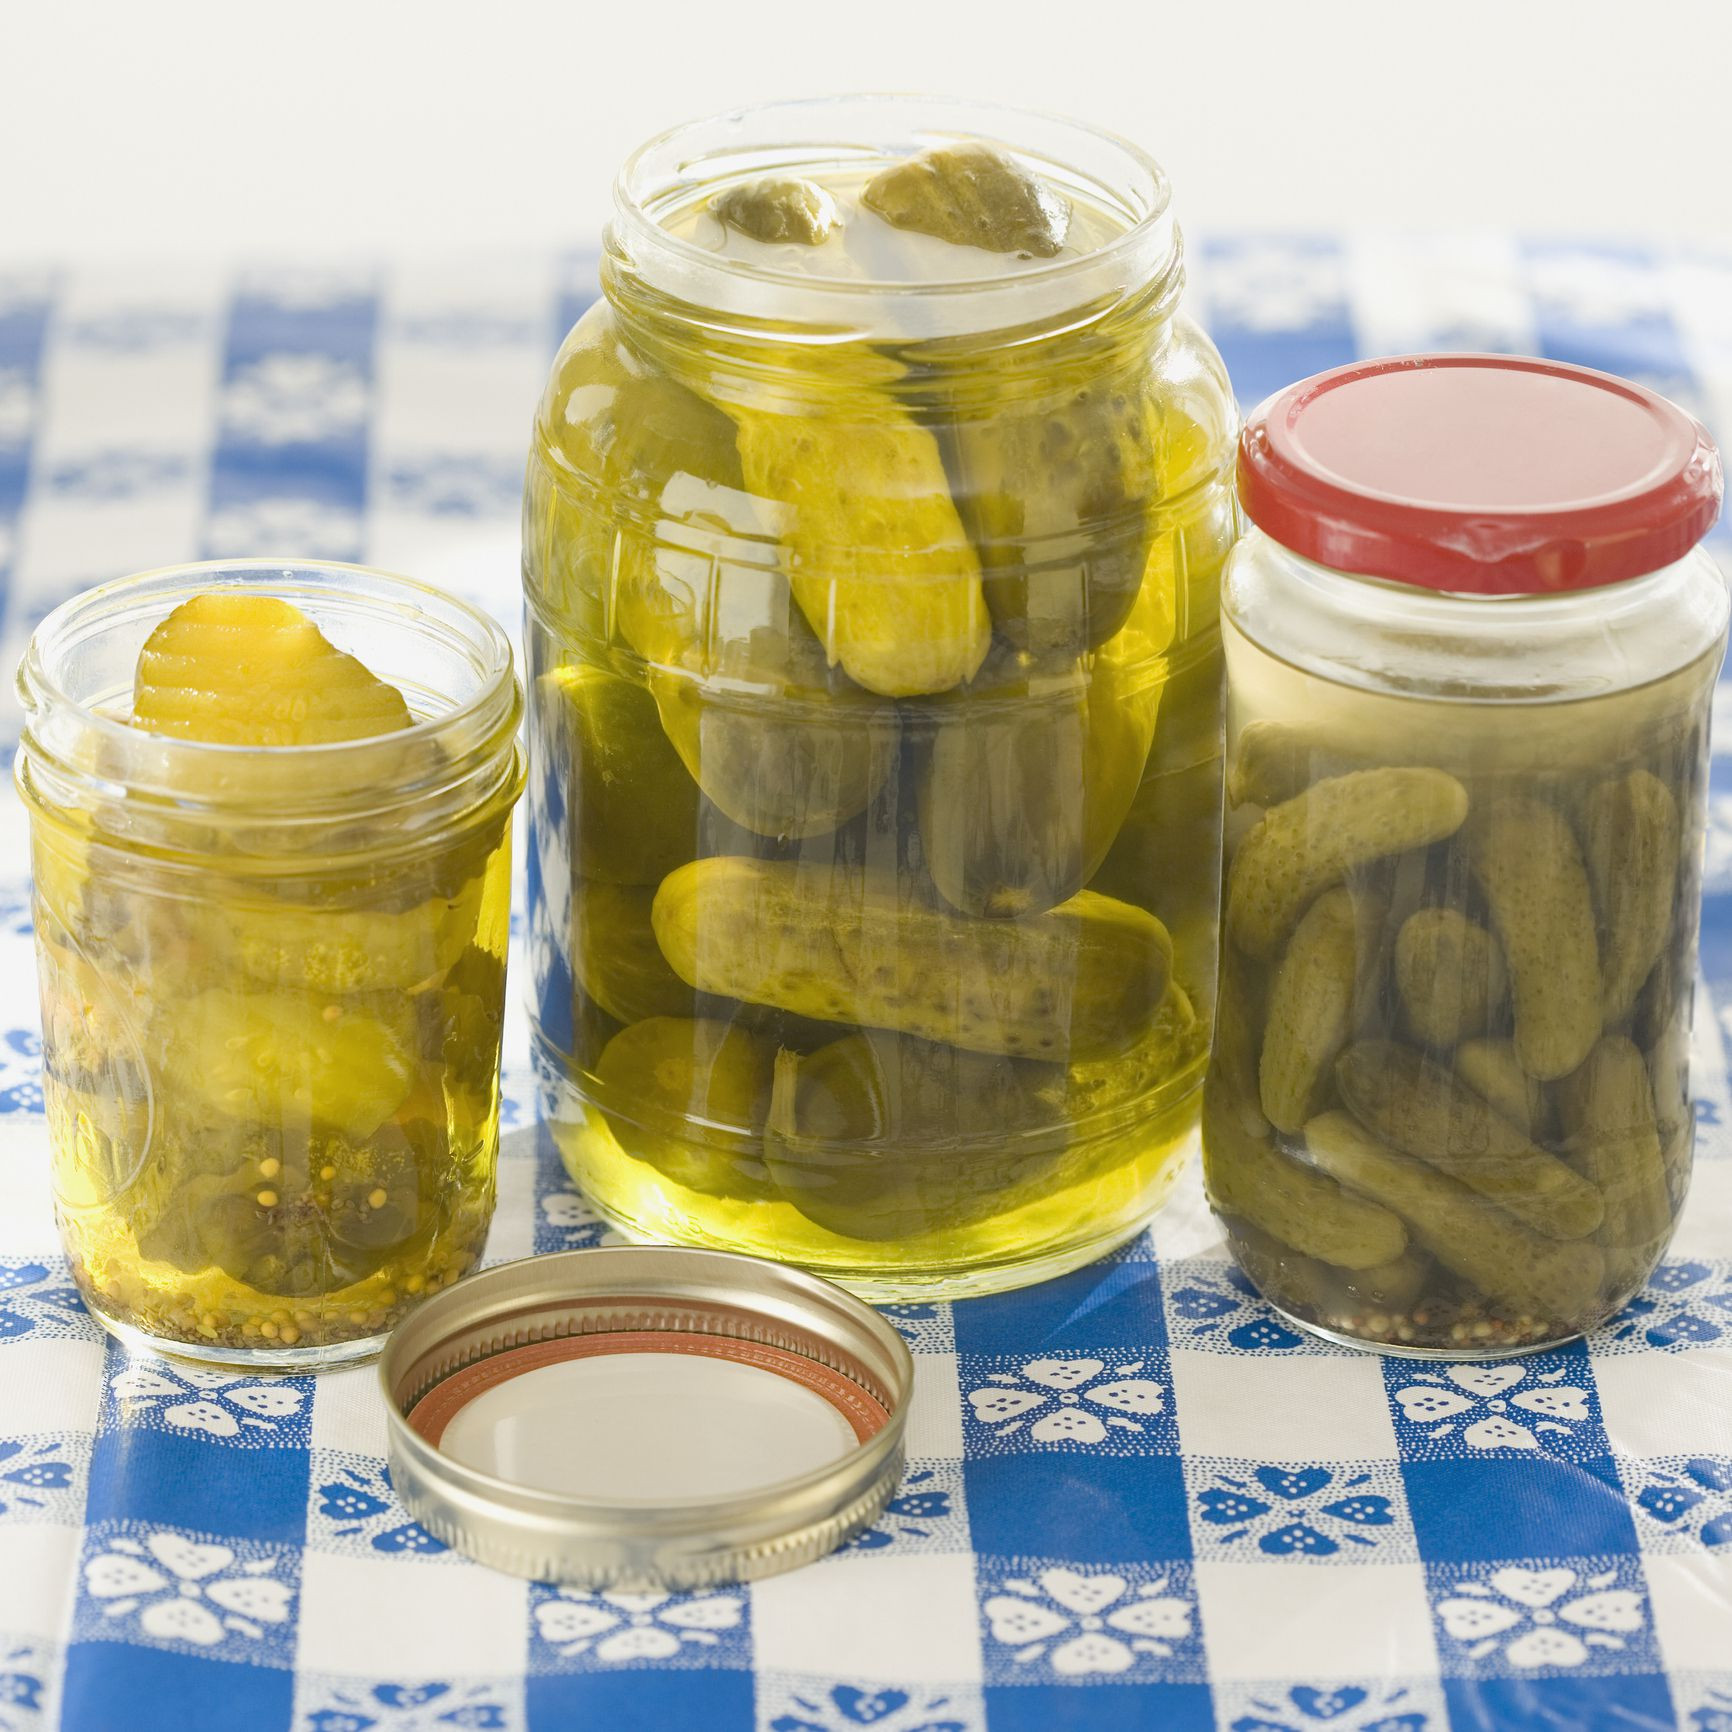 Quick Refrigerator Dill Pickles
 Quick and Easy Refrigerator Dill Pickles Recipe